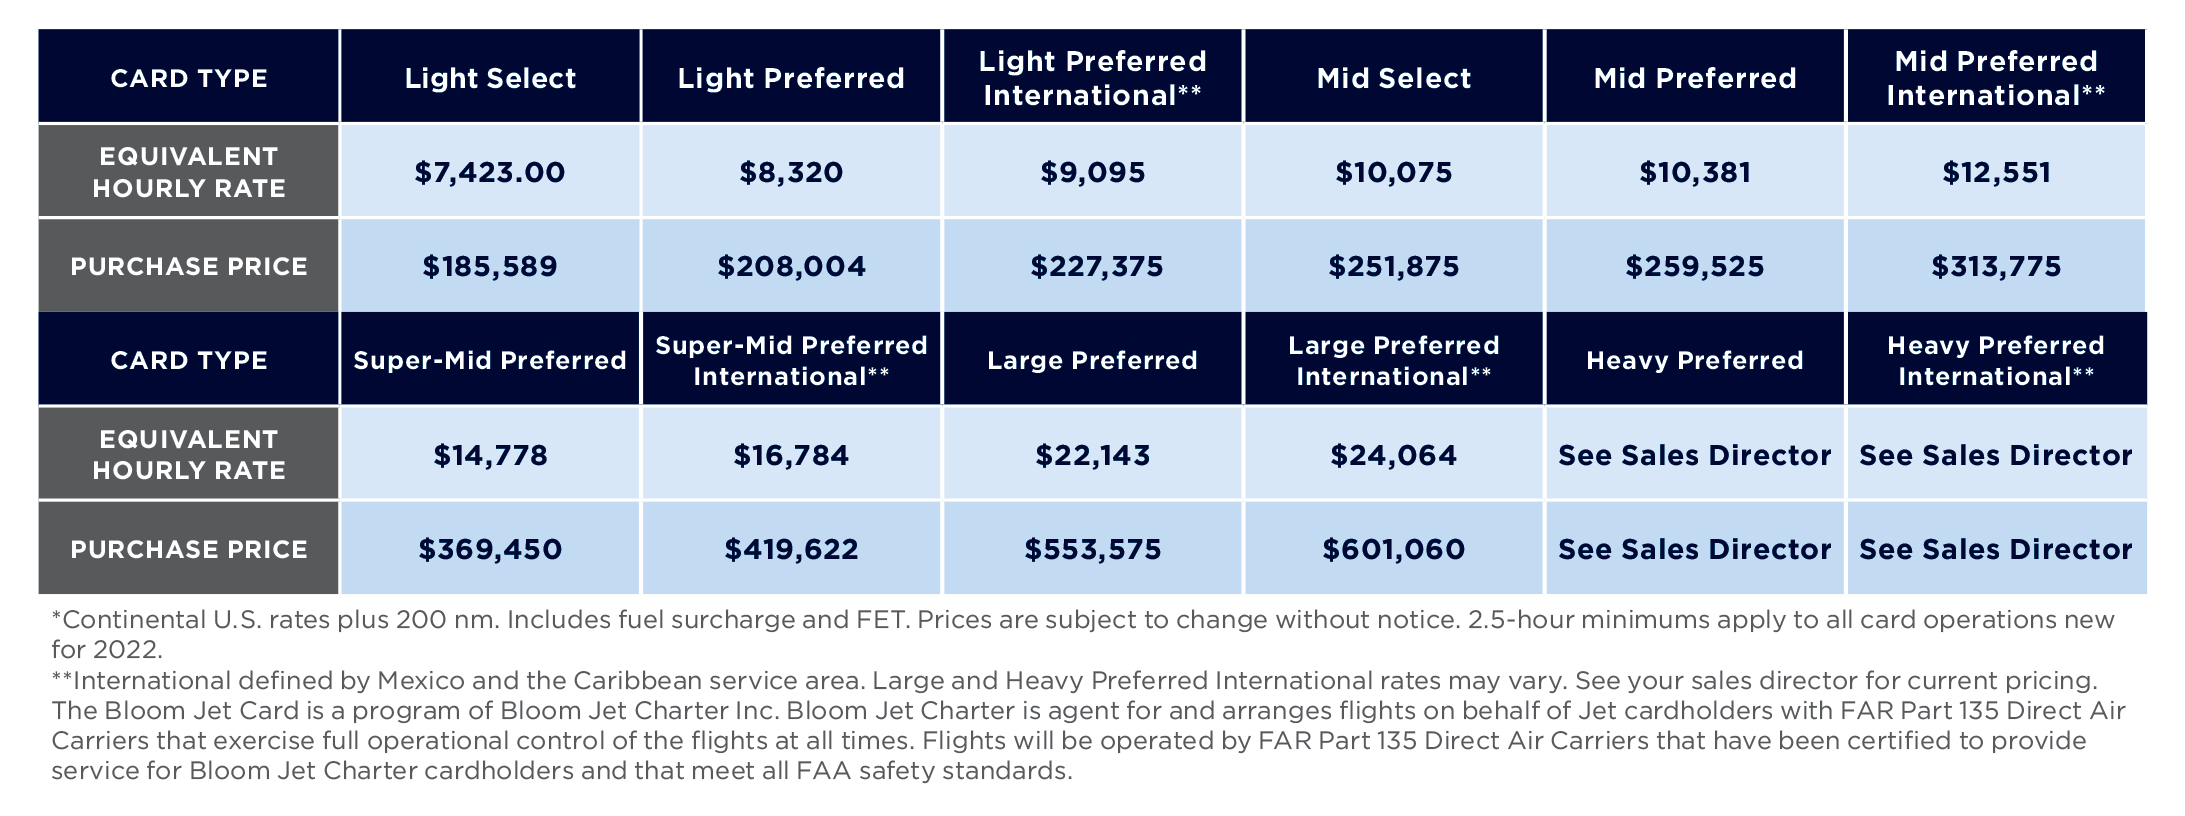 jet charter card pricing